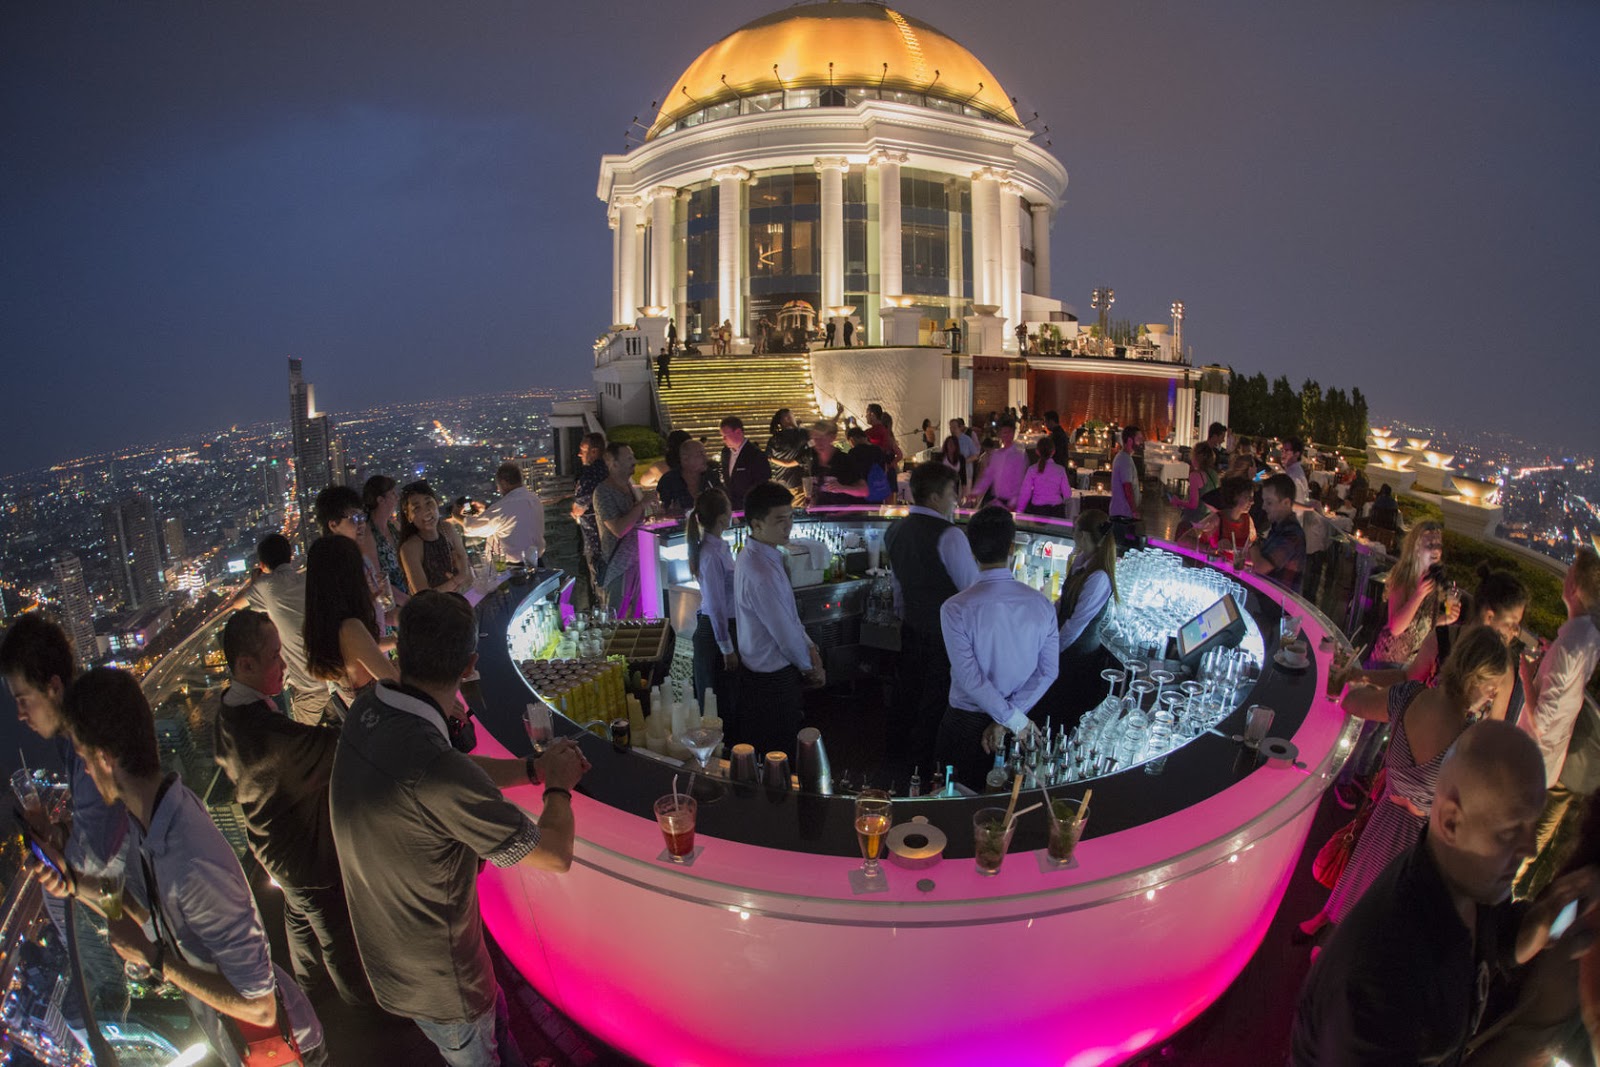 The World’s 30 Best Rooftop Bars… Everyone Should Drink At #9 At Least Once. - The Sky Bar is suspended 820 feet in the air on top of the Tower Club in Bangkok in Thailand.